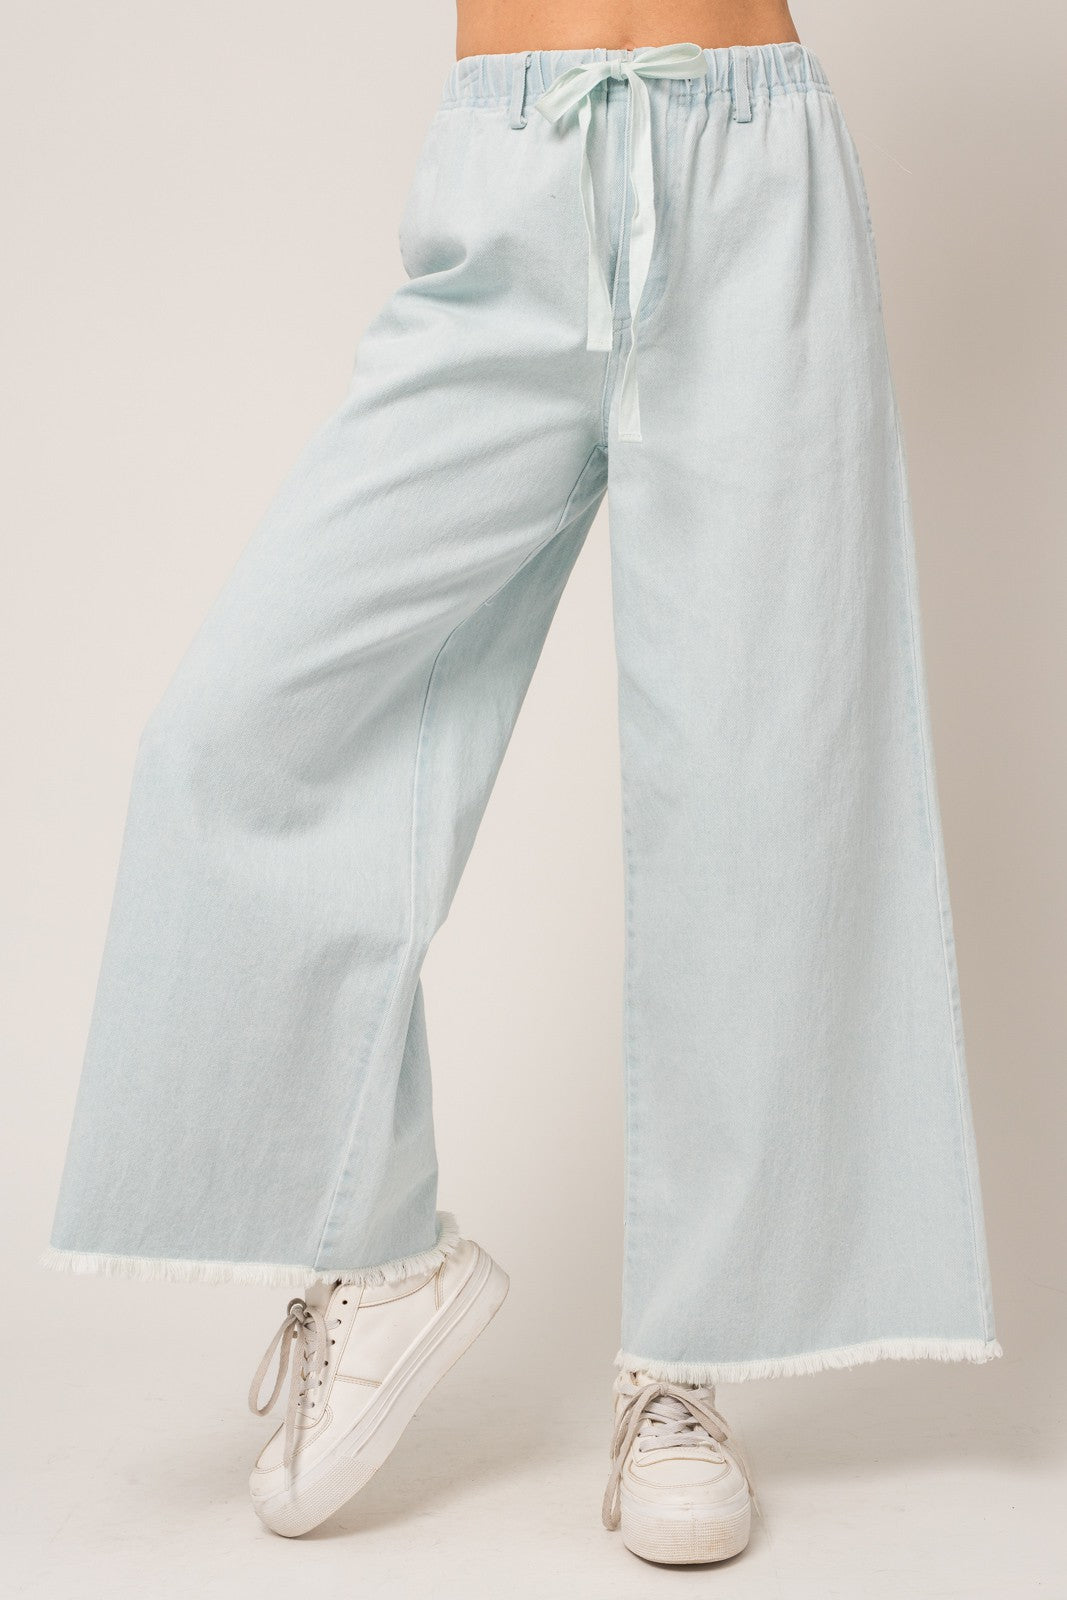 Denim Washed Twill Tie Front Wide Leg Pants - Light Chambray